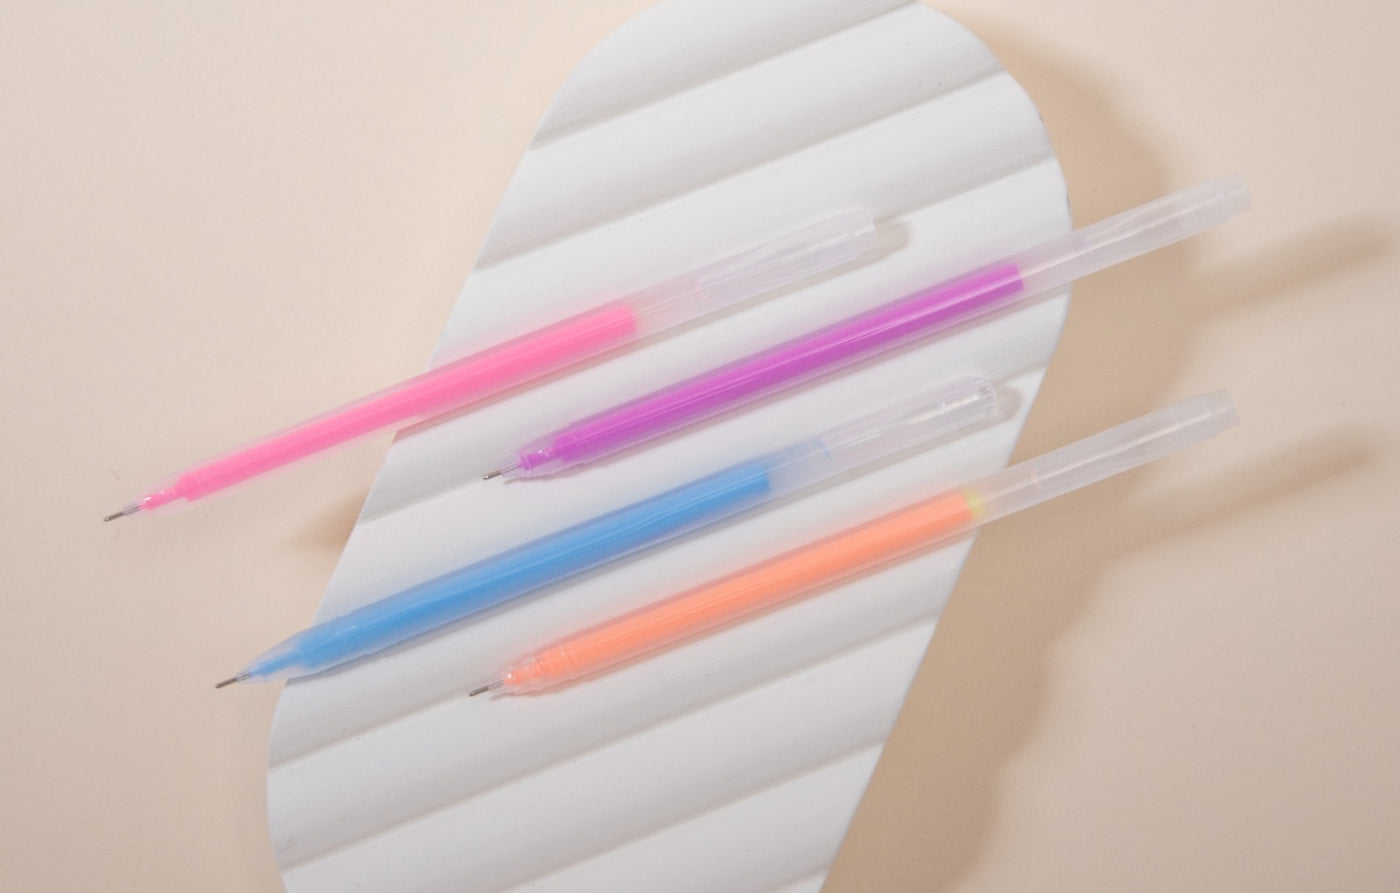 ULTRA PRECISE RAINBOW GEL MAPPING PENS - 4 pack Brows but make it art range